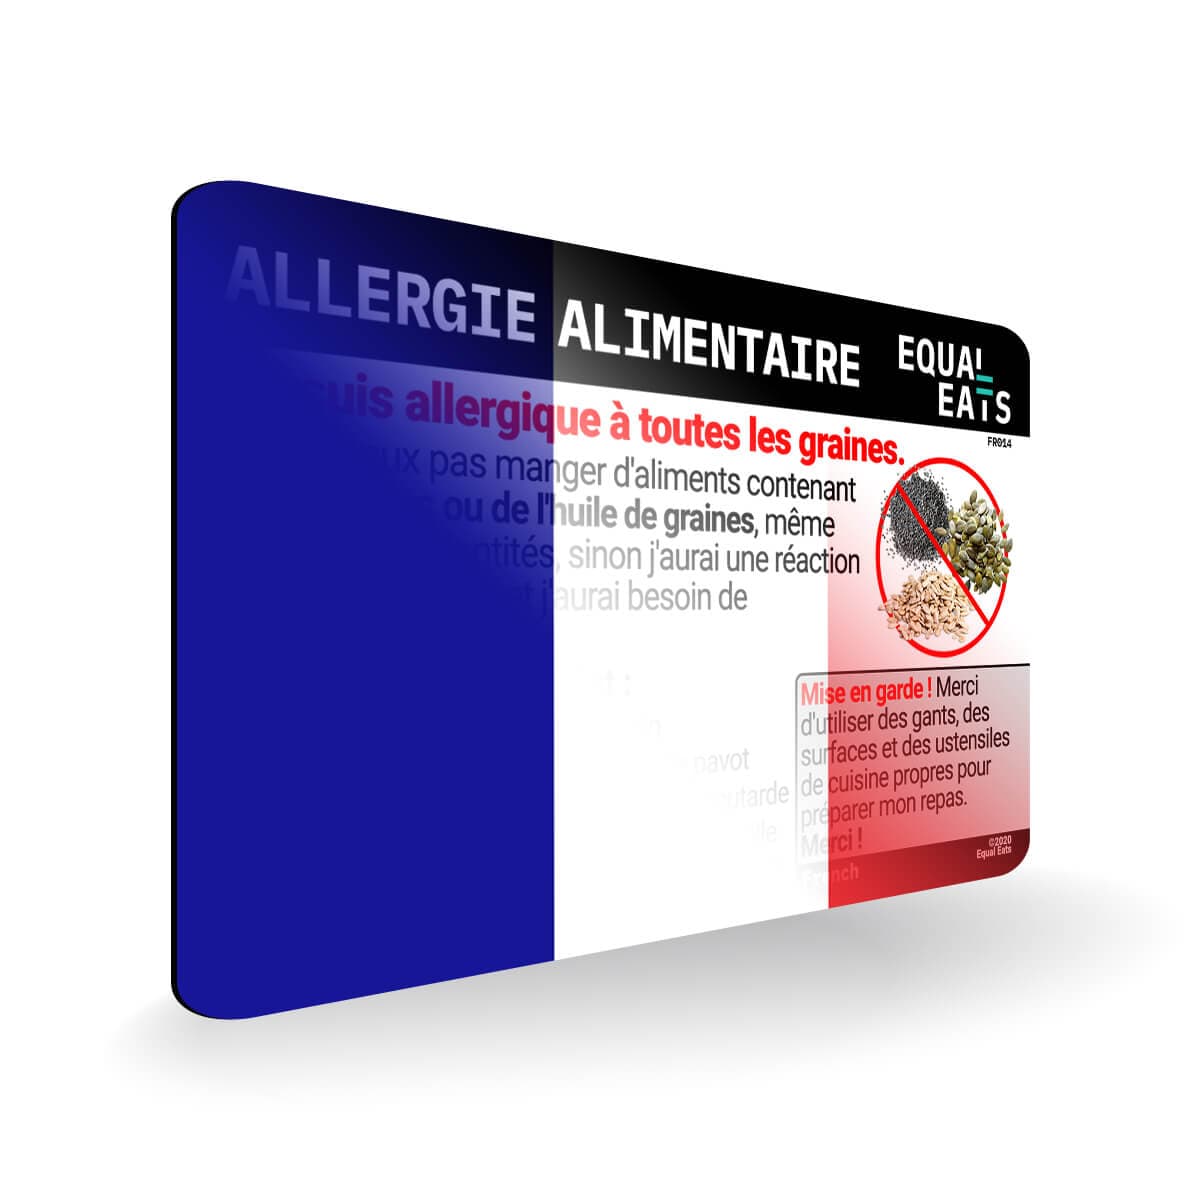 Seed Allergy in French. Seed Allergy Card for France